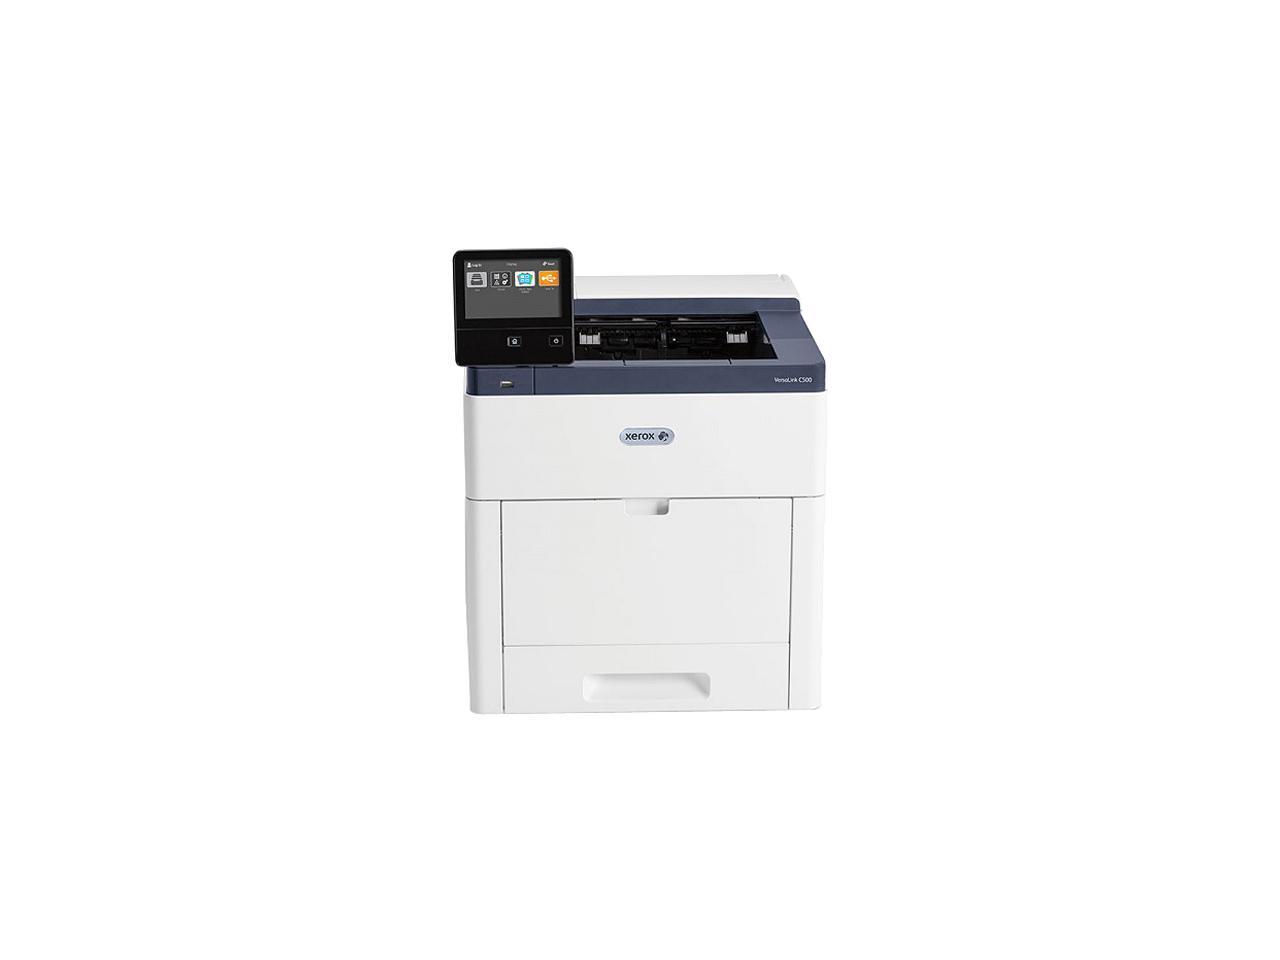 Xerox VersaLink C500/DNM Color Printer, 45 ppm, With Duplexing, Letter/Legal, 45ppm, 2-Sided Print, USB/Ethernet, 550-Sheet Tray, 150-Sheet Multi-Purpose Tray, 110V, Solutions & Cloud Enabled, Metered